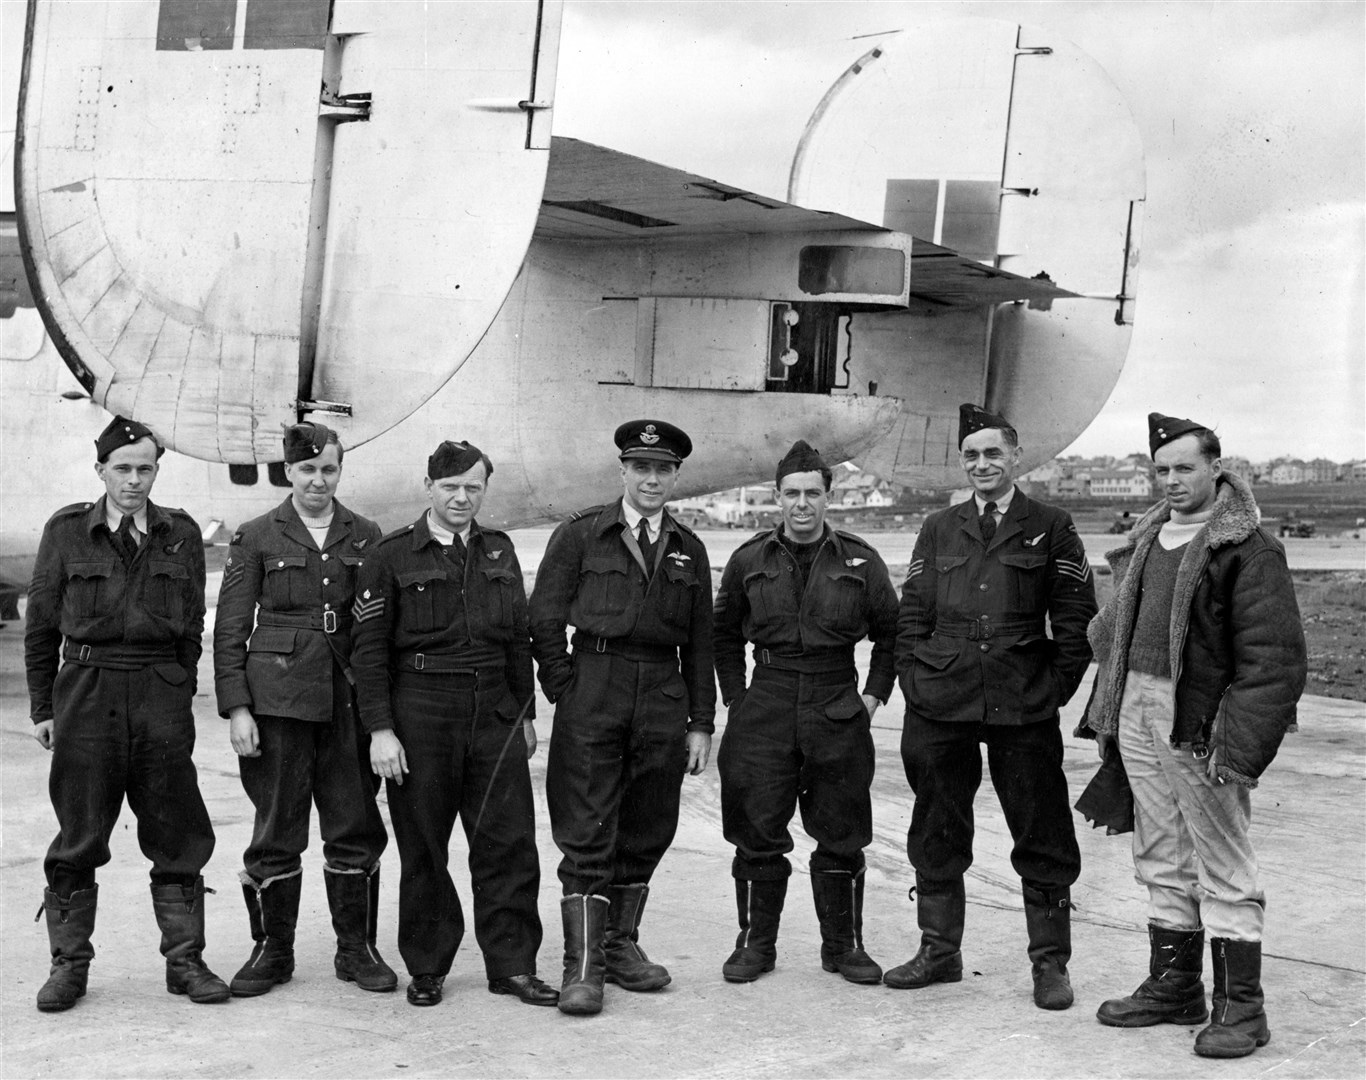 Flight Lieutenant AW Fraser and his crew, stand in front of their Consolidated Liberator I, AM929/H, of 120 Squadron RAF, at Reykjavik, Iceland, after sinking the German type IXD2 submarine U-200 on 24 June 1943. Fraser was awarded a bar to his DFC for attacking the U-boat in the face of determined anti-aircraft fire, and for bringing his damaged aircraft and crew safely back to base following the engagement. Left to right: Sergeant AW Parsons (flight engineer), Flight-Sergeant K Johnson (wireless oeprator/air gunner), Flight-Sergeant W Stott (wireless operator/air gunner), Flight Lieutenant AW Fraser (pilot), Flight-Sergeant LC Heiser (nvaigator), Flight-Sergeant EA Mincham (wireless operator/air gunner), and Sergeant HJ Oliver (2nd pilot). Picture: Air Historical Branch